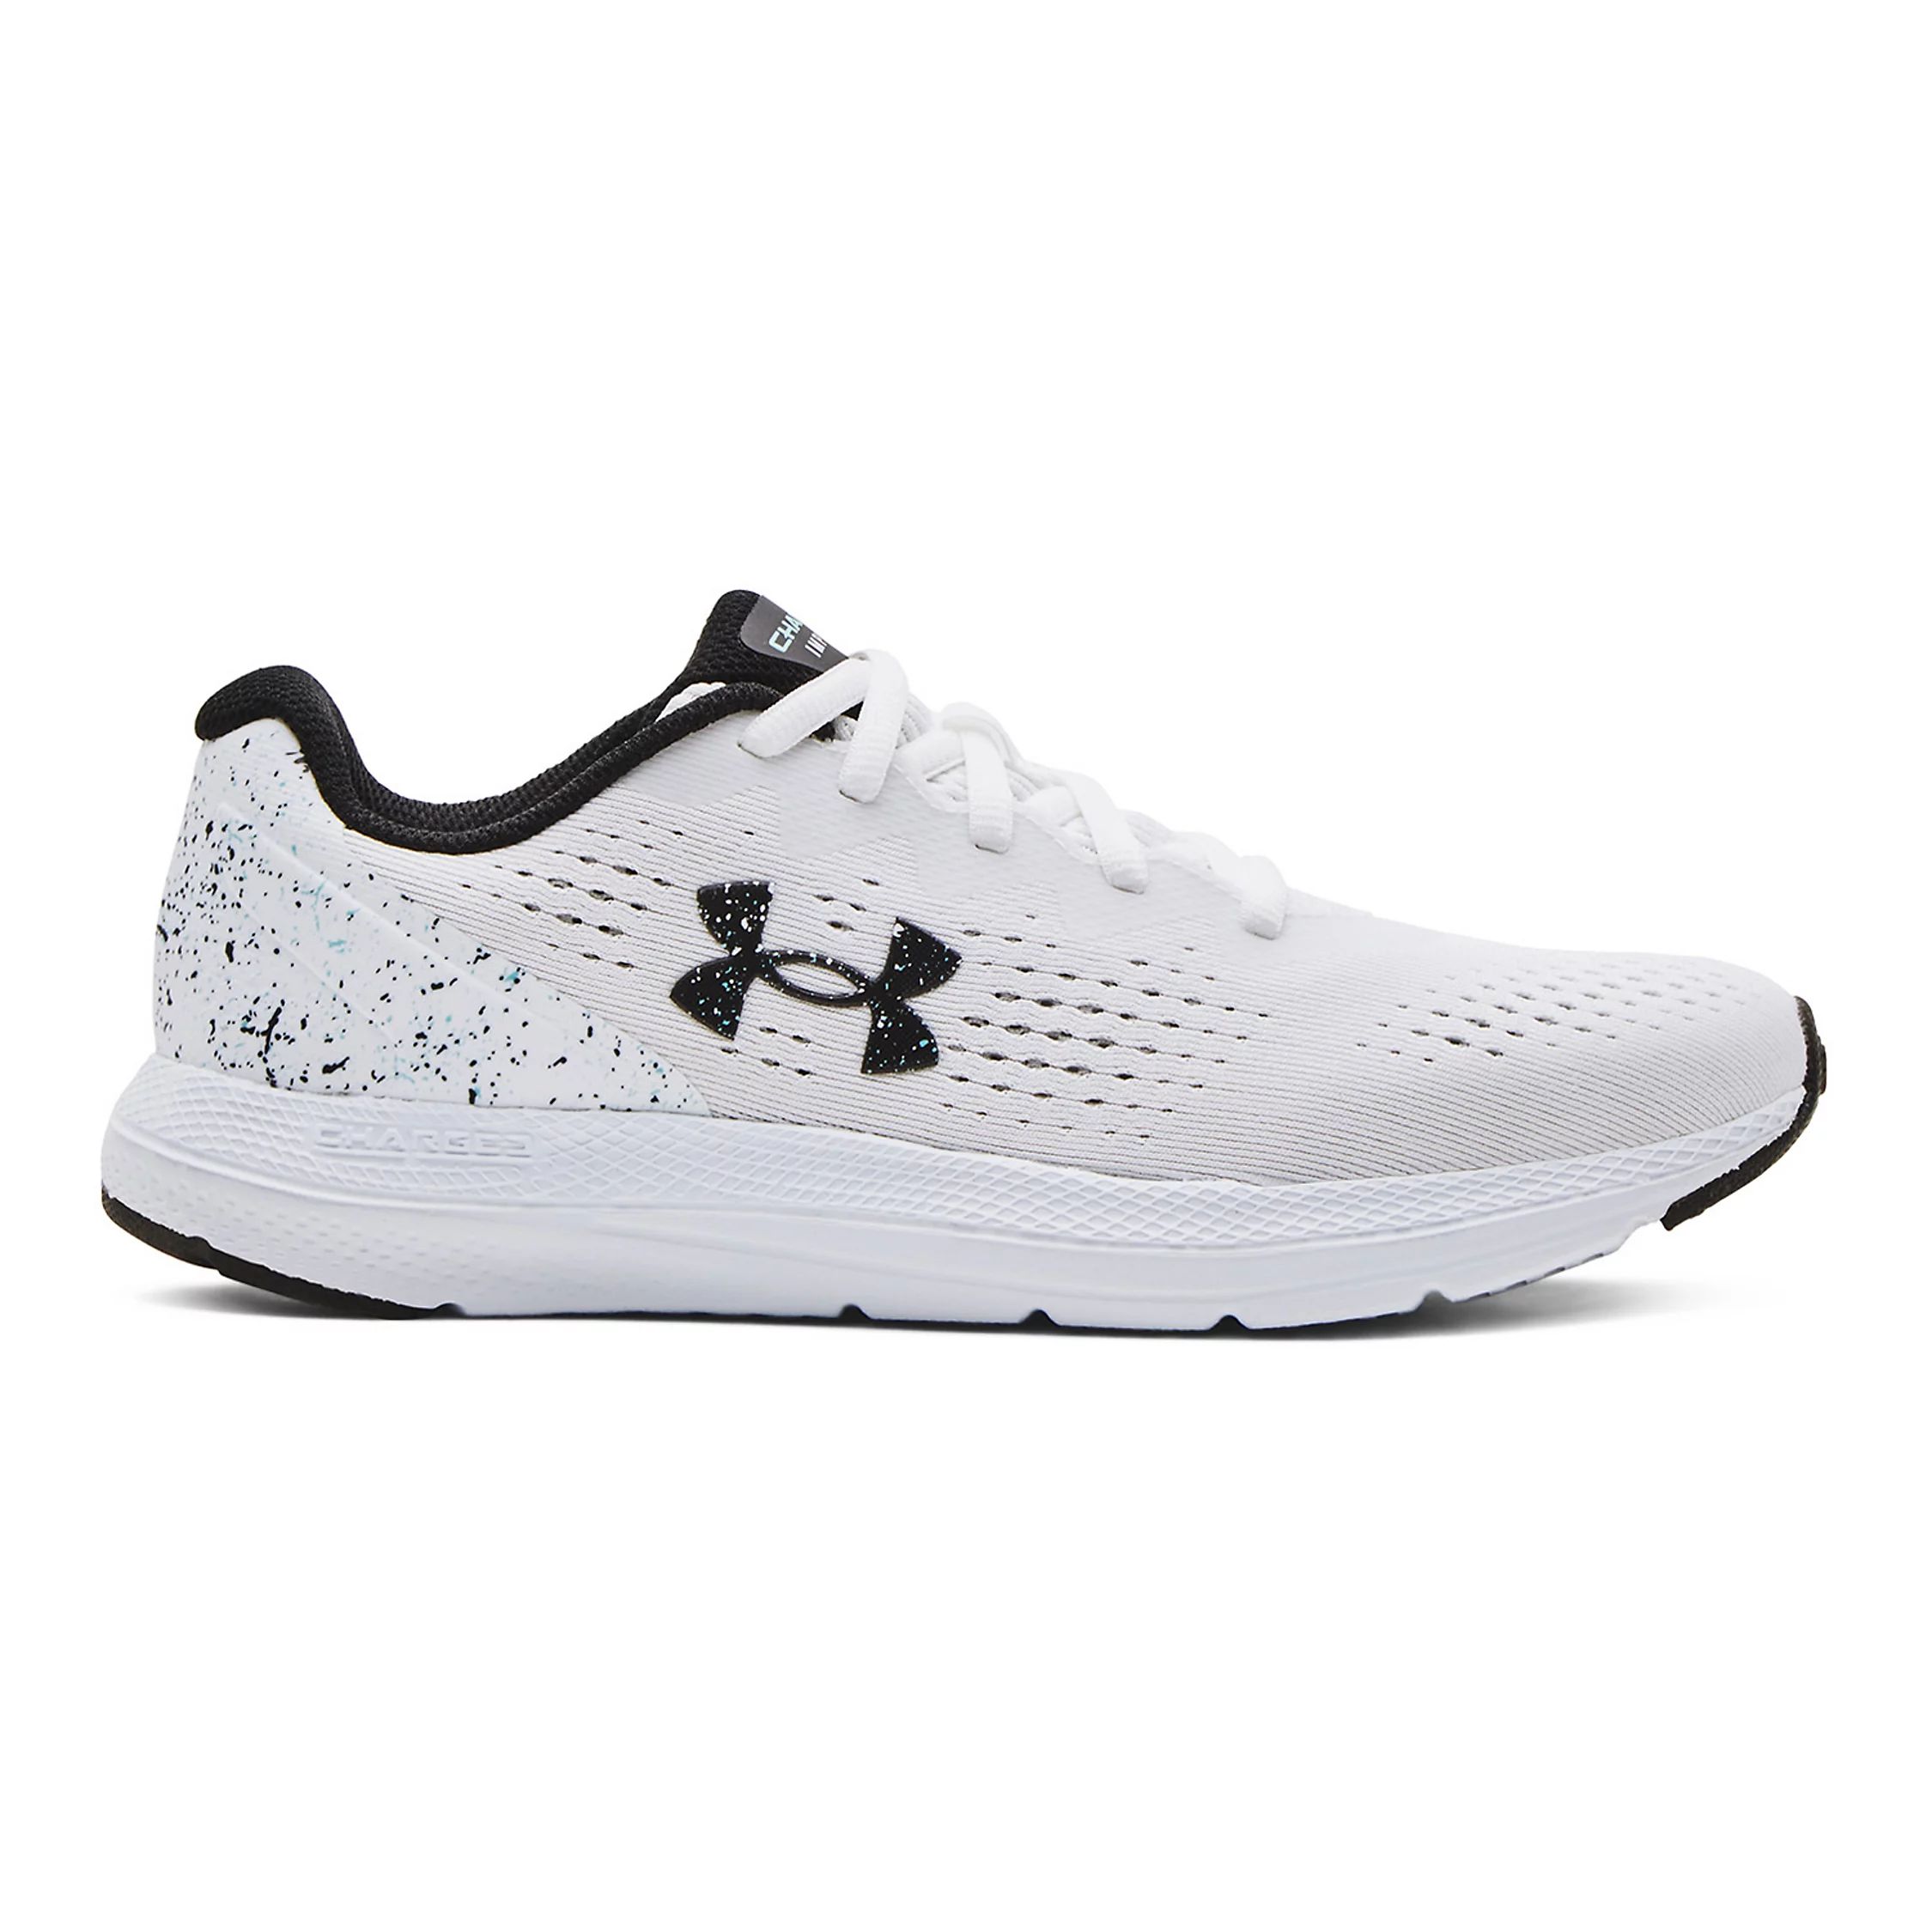 Under Armour Charged Impulse 2 Women's Running Shoes | Kohl's